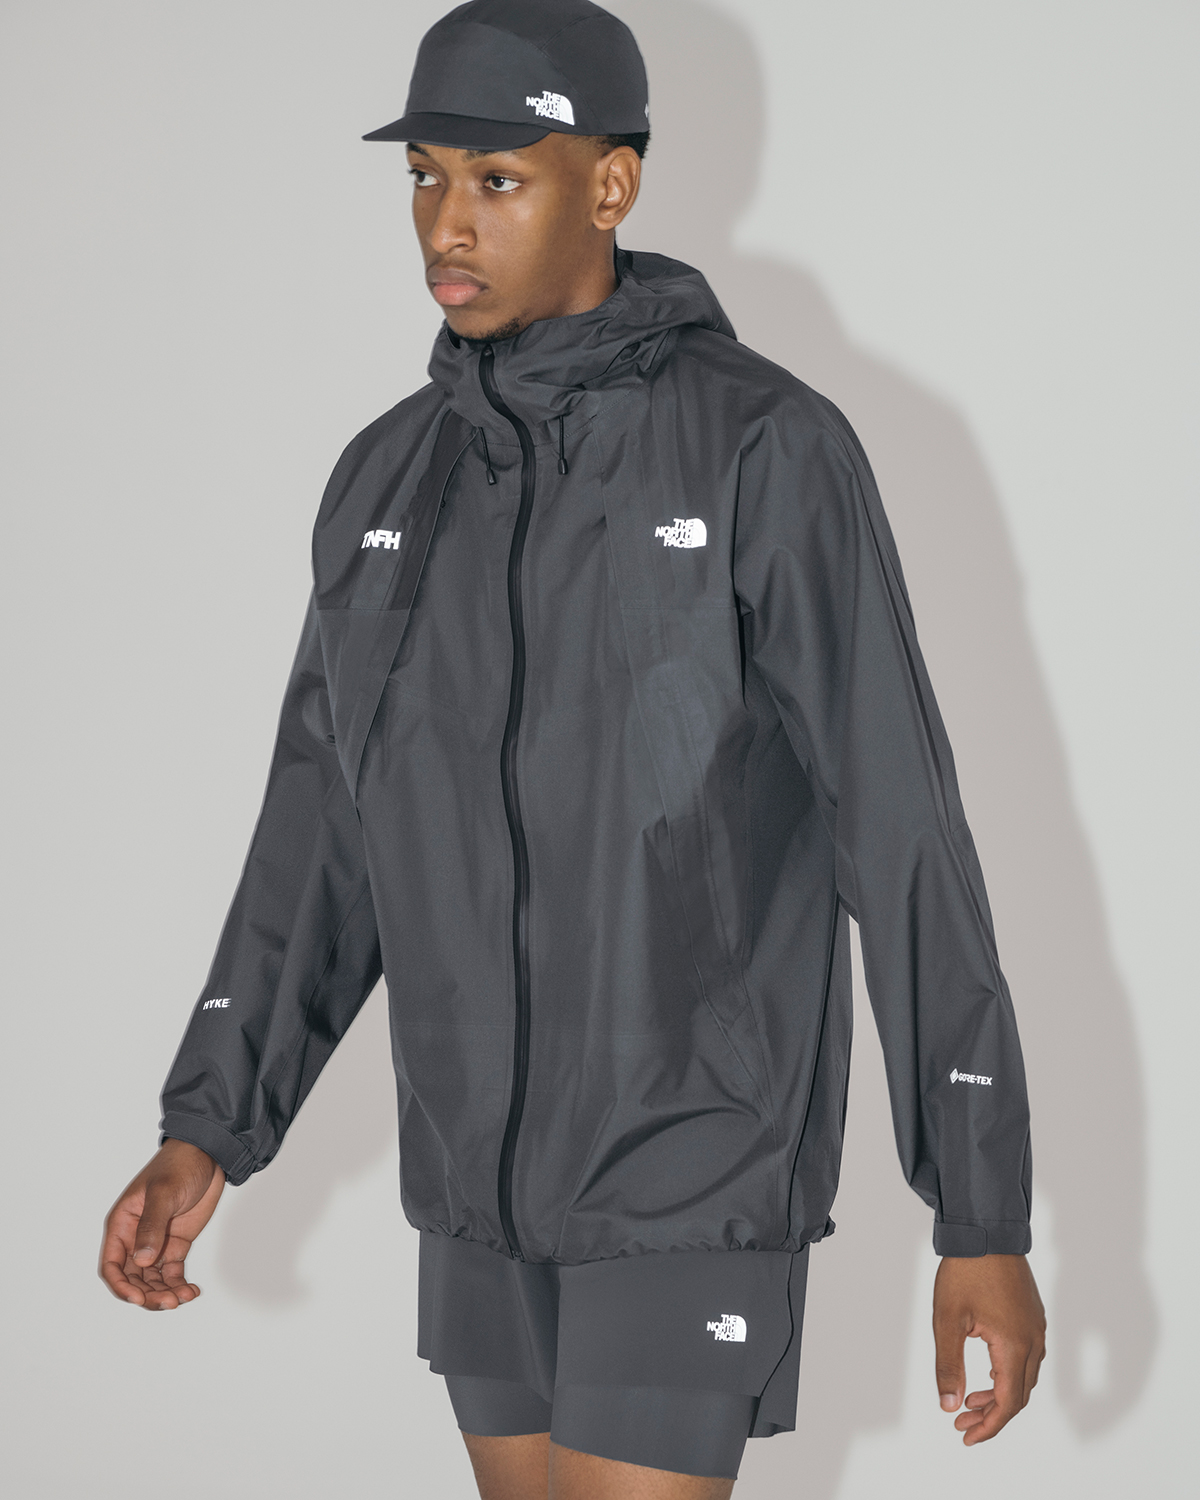 TNFH THE NORTH FACE × HYKE 2024 販売情報